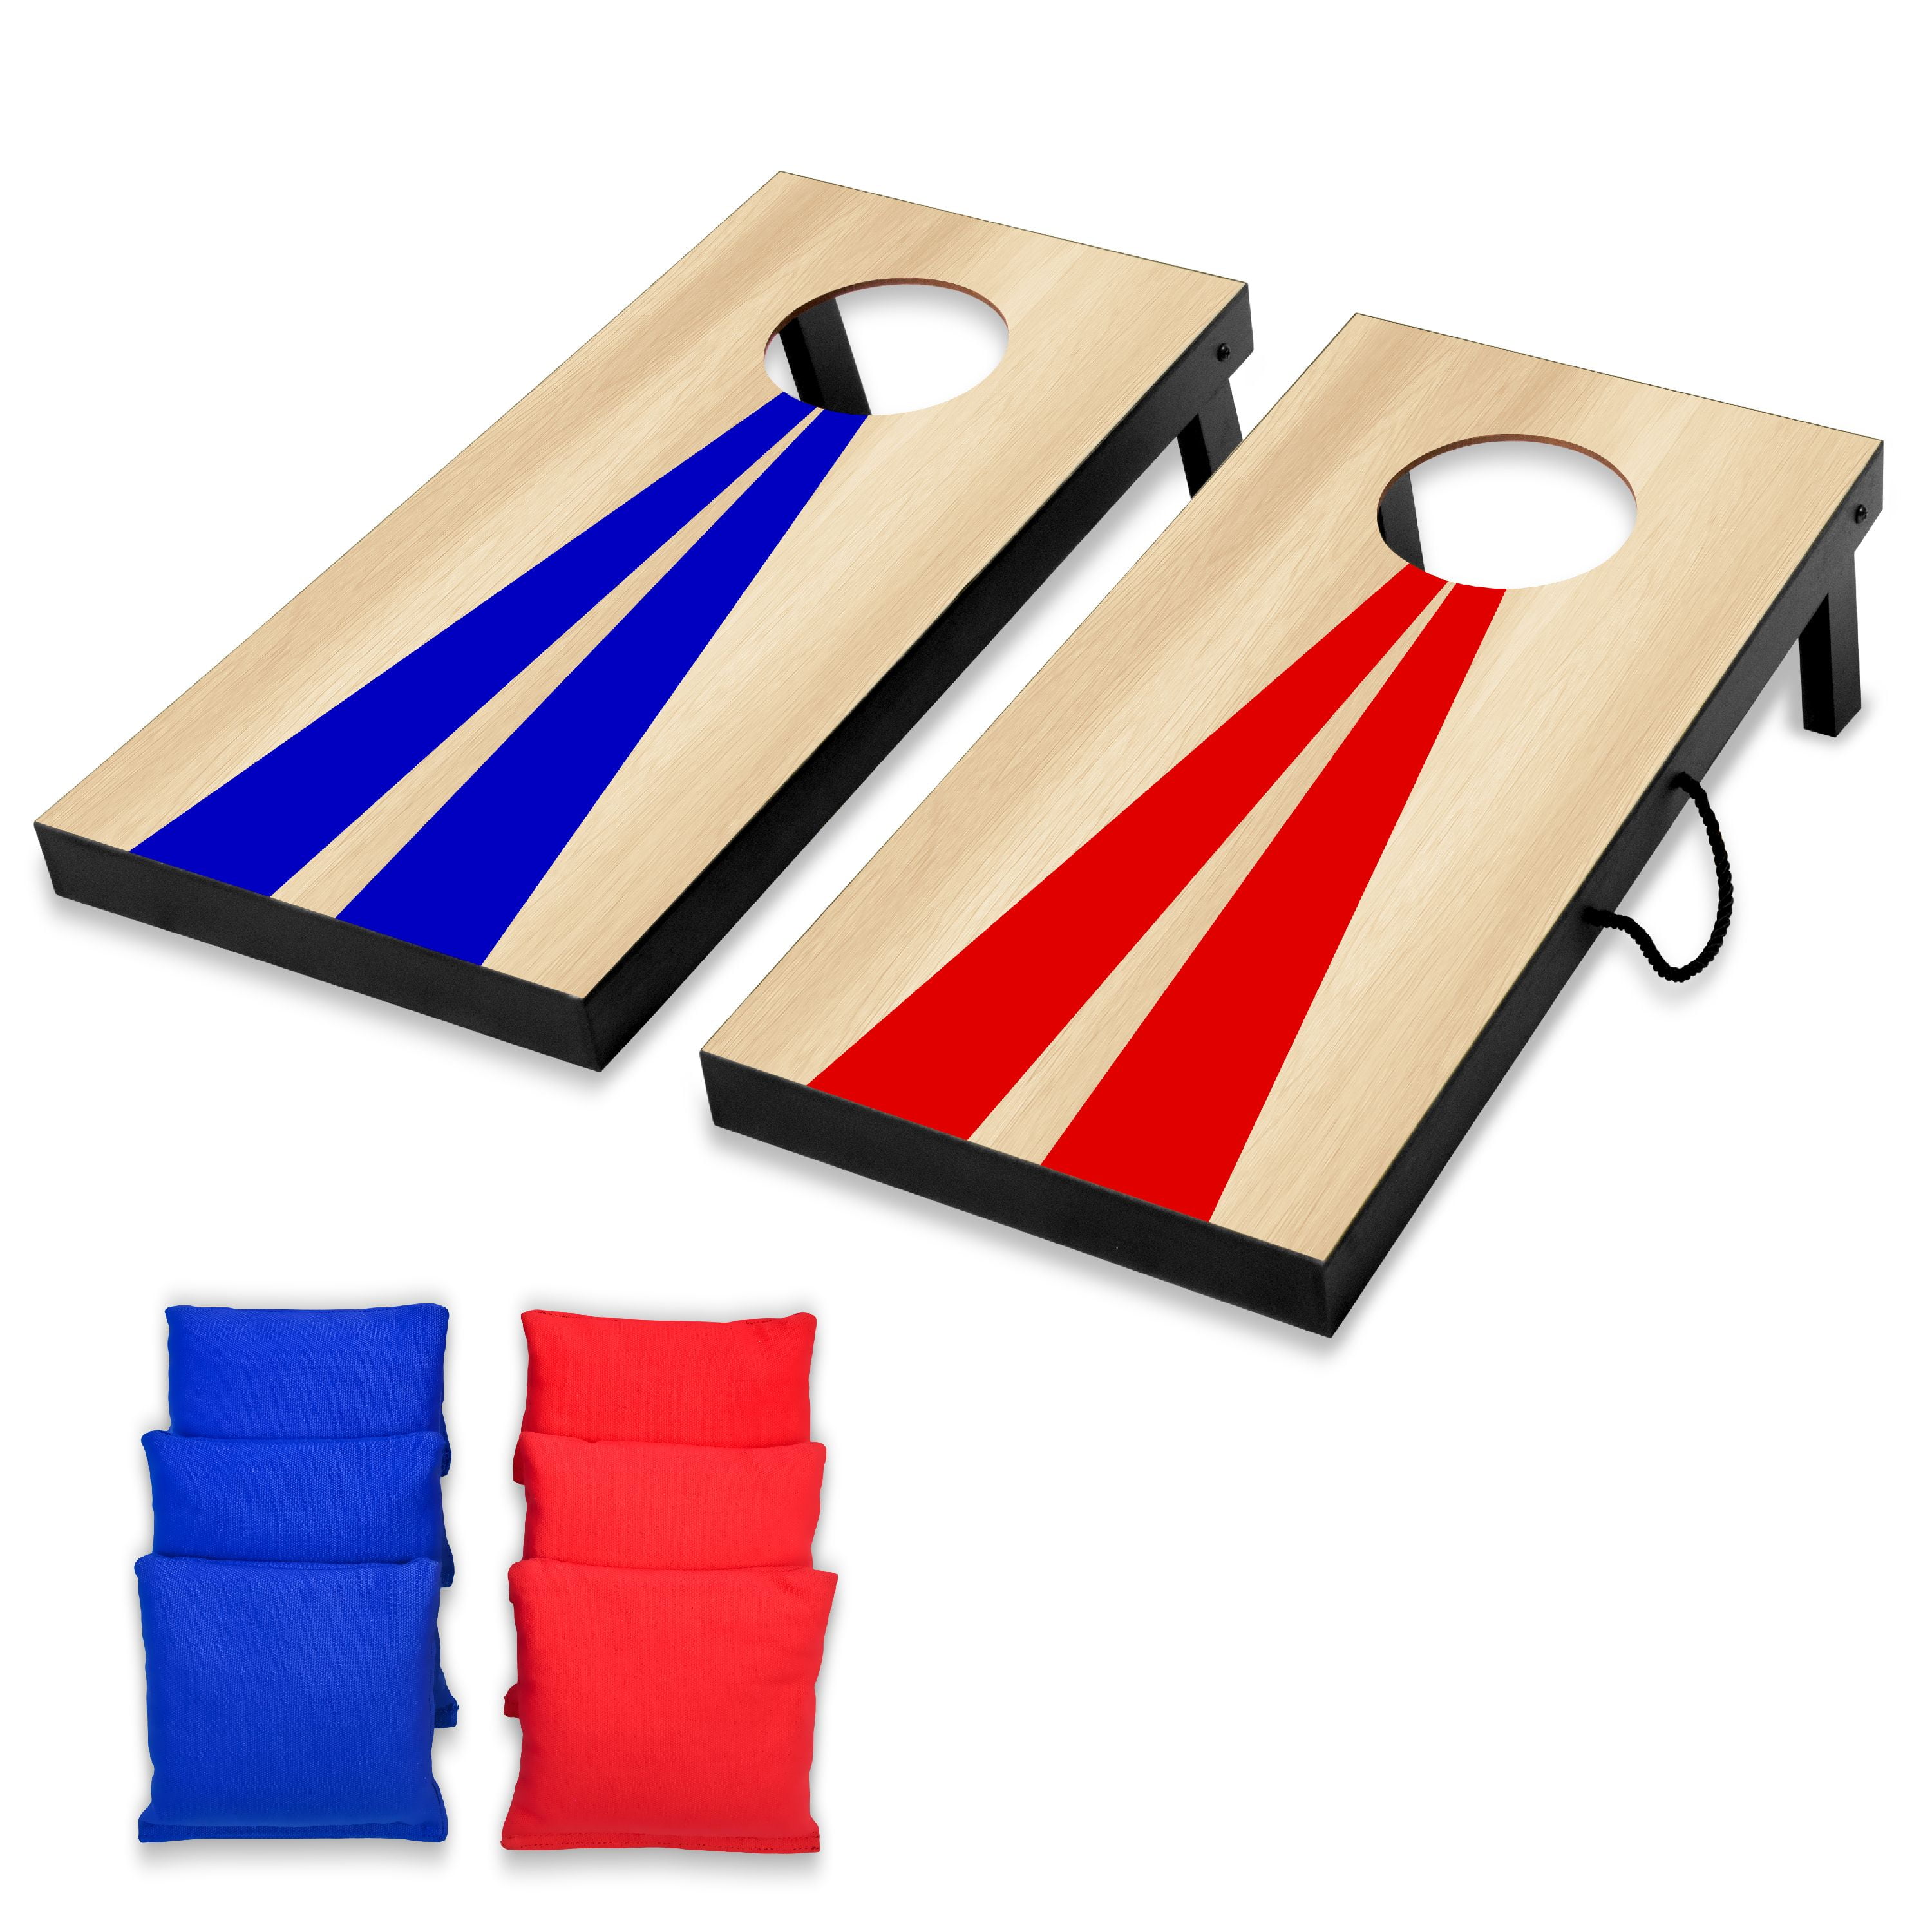 Beach 2-in-1 Camping Game Set 3 x 2-feet JUOIFIP Collapsible Portable Cornhole Set Cornhole Game Boards with 10 Bean Bags for Kids Adults Cornhole Set with Storage Bag for Backyard Lawn